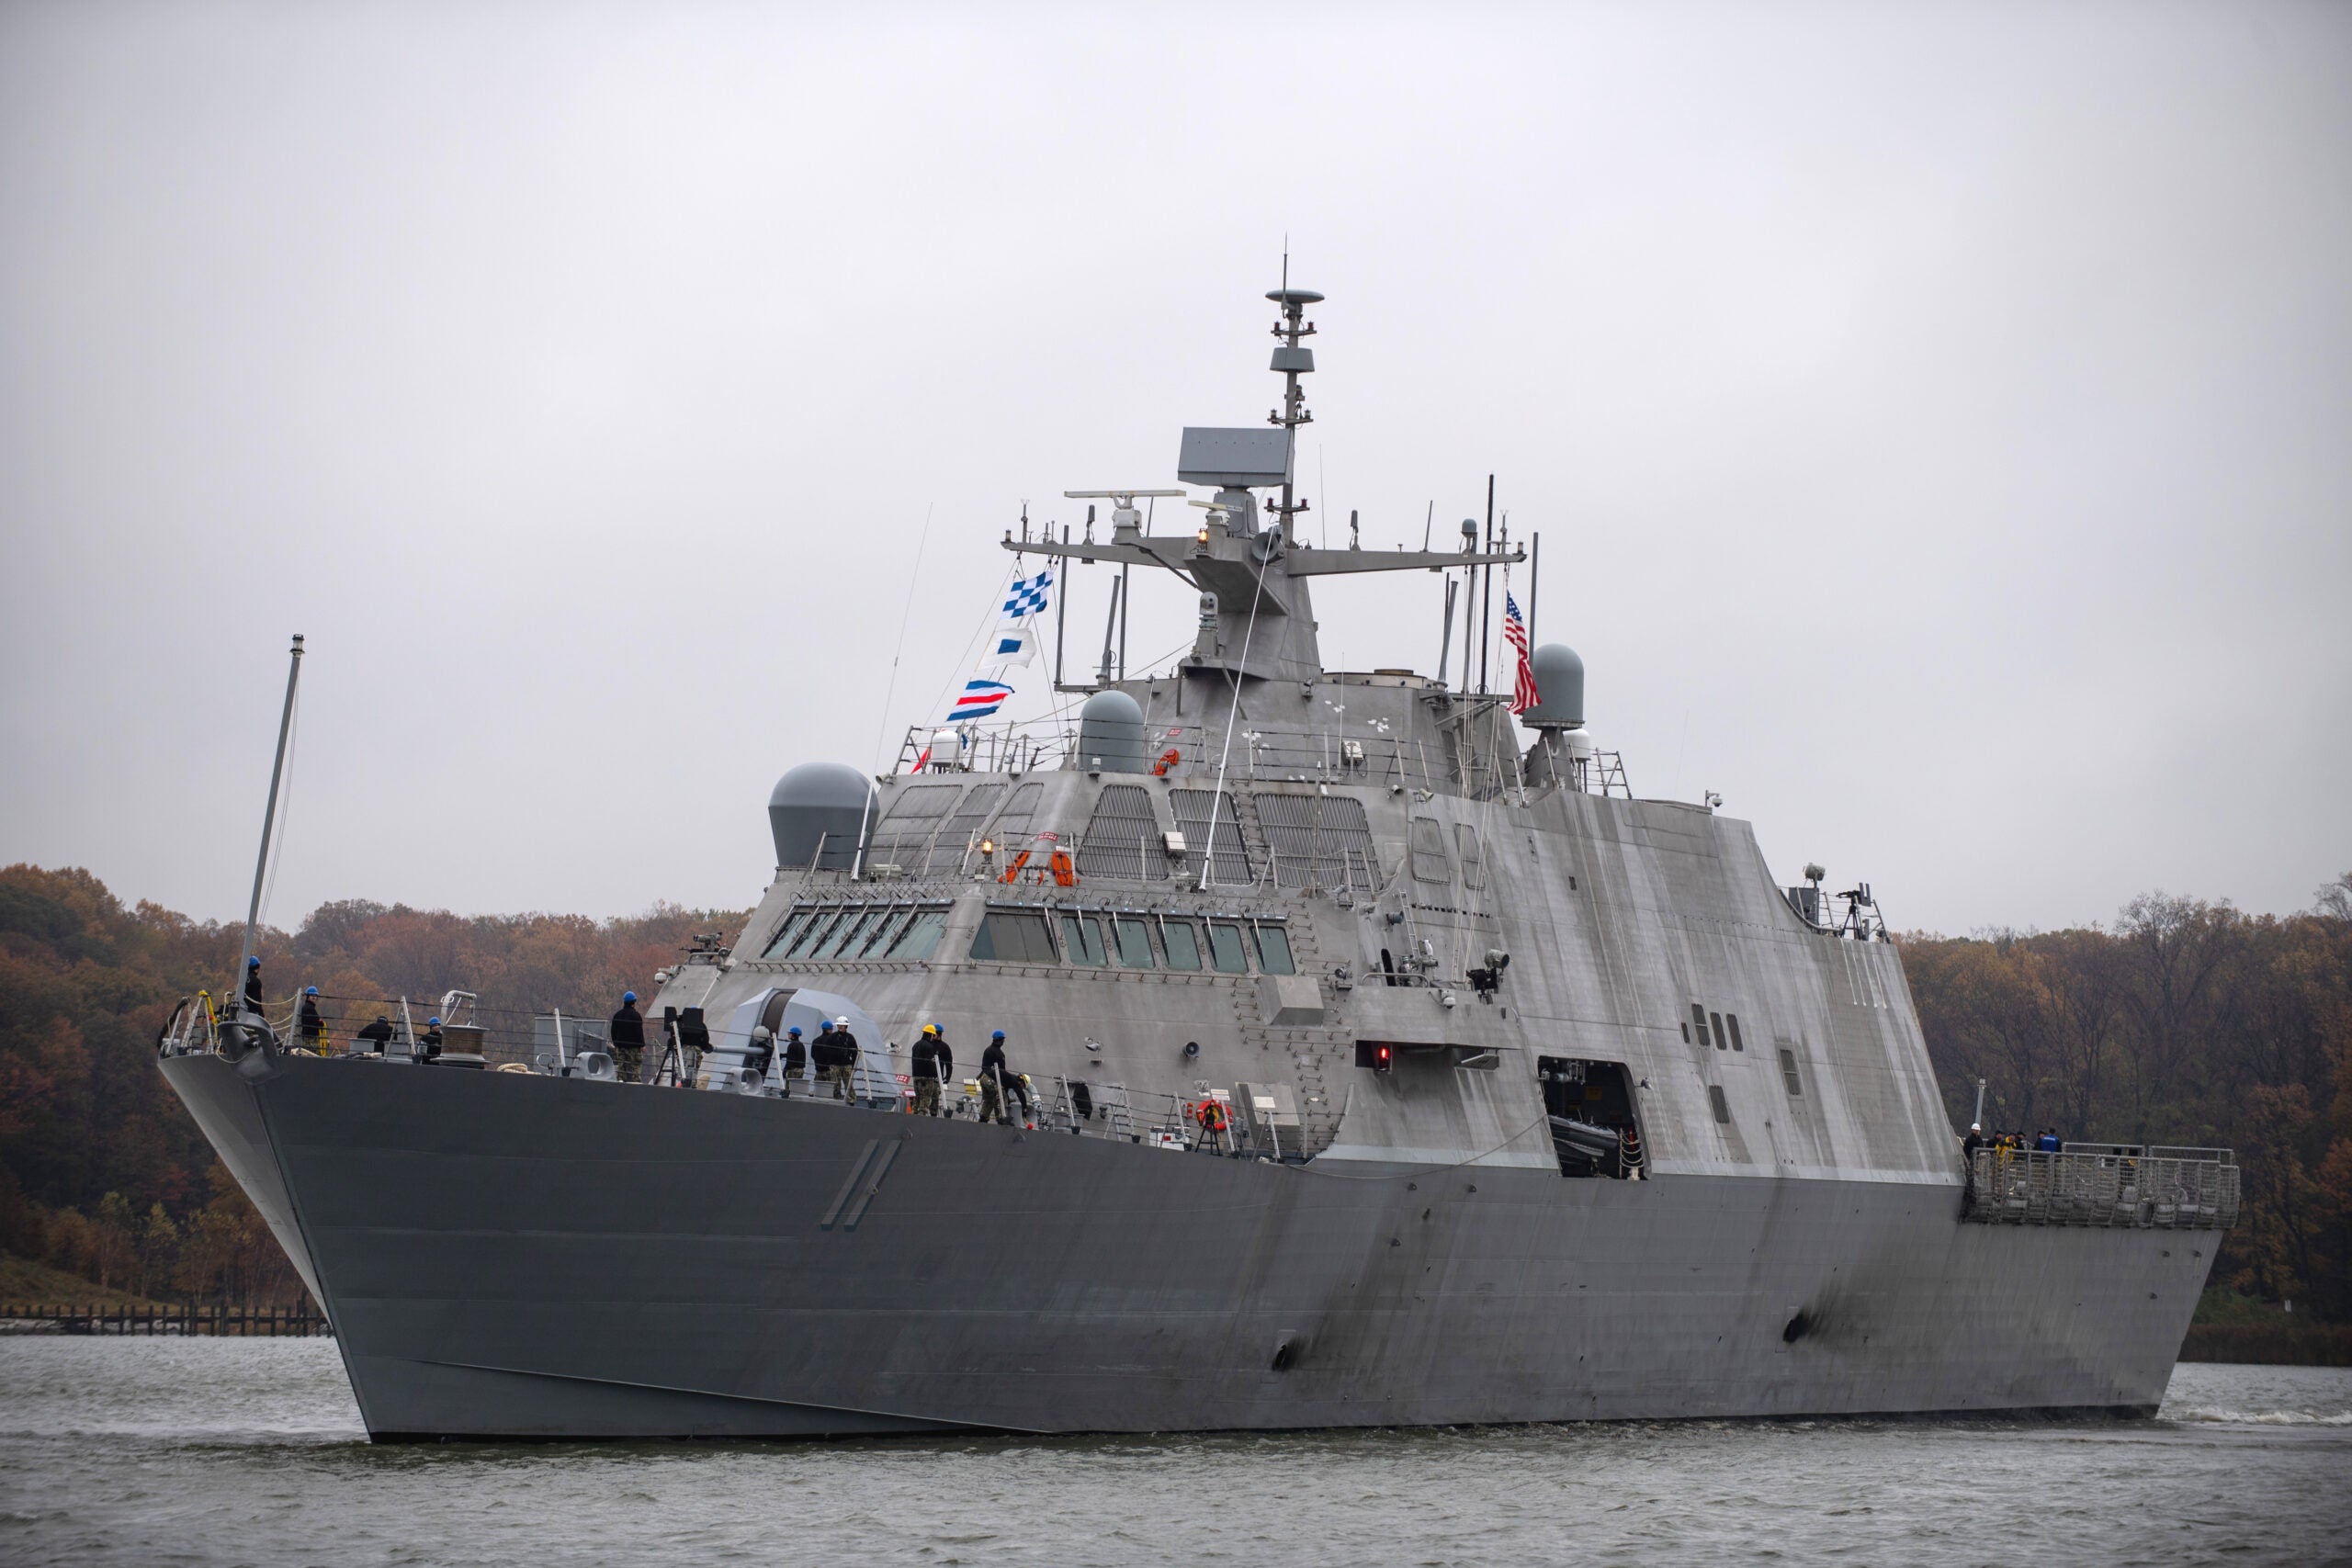 ANNAPOLIS, Md. (Nov. 13, 2018) The littoral combat ship USS Sioux City (LCS 11) transits the Severn River before it arrives at the U.S. Naval Academy. Sioux City, slated for commissioning Nov. 17, will be the thirteenth littoral combat ship to enter the fleet and the sixth of the Freedom variant. It is the first ship named for Sioux City, the fourth largest city in Iowa. (U.S. Navy photo by Mass Communication Specialist 2nd Class Nathan Burke/Released) 181113-N-OI810-140